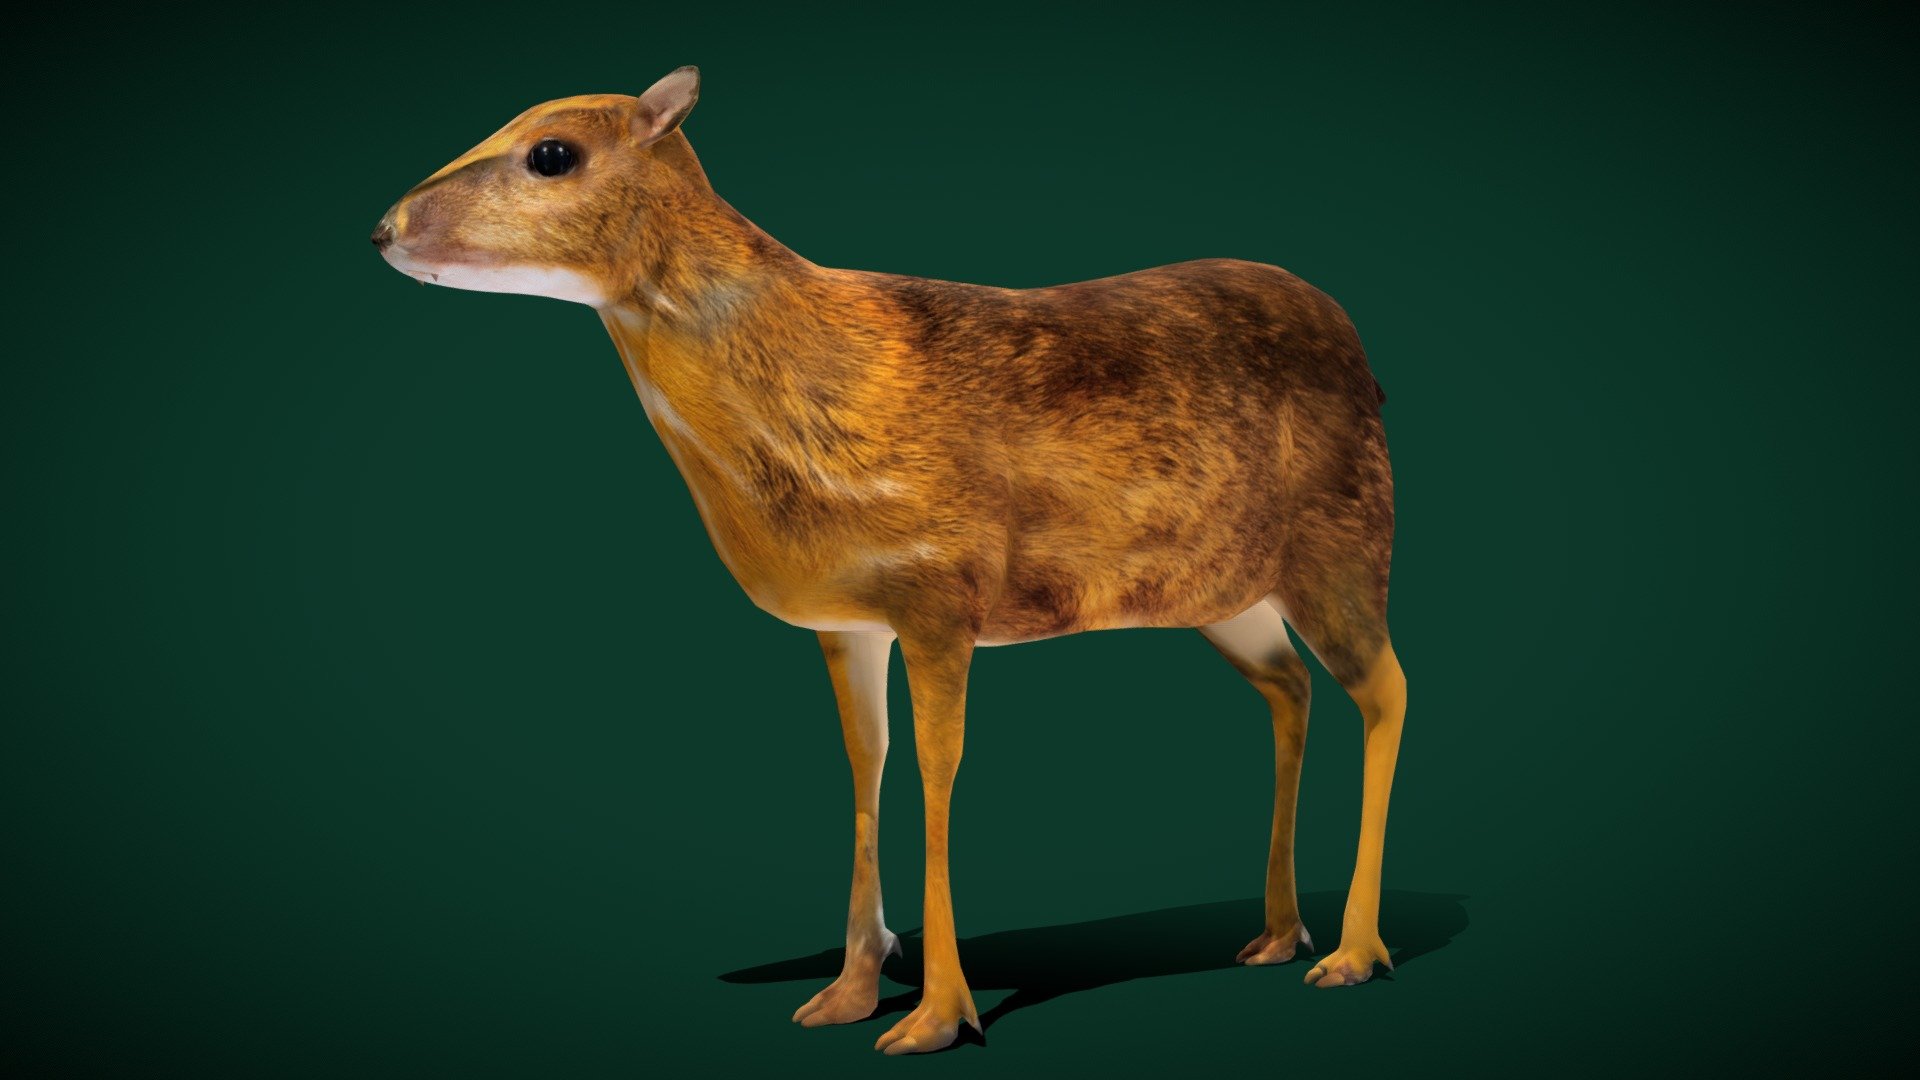 Chevrotain (Mouse-Deer) Vietnamese Fanged Mouse-deer

Tragulidae Animal Mammal (diminutive, even-toed ungulates)

1 Draw Calls

Lowpoly

GameReady

16 Animations

4K PBR Textures Material

Unreal FBX

Unity FBX  

Blend File 

USDZ File (AR Ready). Real Scale Dimension

Textures Files

GLB File

Gltf File ( Spark AR, Lens Studio(SnapChat) , Effector(Tiktok) , Spline, Play Canvas ) Compatible

Triangles : 6944

Vertices  : 3497

Faces     : 3506

Edges     : 6998

Diffuse, Metallic, Roughness , Normal Map ,Specular Map,AO,
Chevrotains, or mouse-deer, are diminutive, even-toed ungulates that make up the family Tragulidae, and are the only living members of the infraorder Tragulina. The 10 extant species are placed in three genera, but several species also are known only from fossils. Wikipedia
Scientific name: Tragulidae - Fanged Mouse-deer Animal (Lowpoly) - 3D model by Nyilonelycompany 3d model